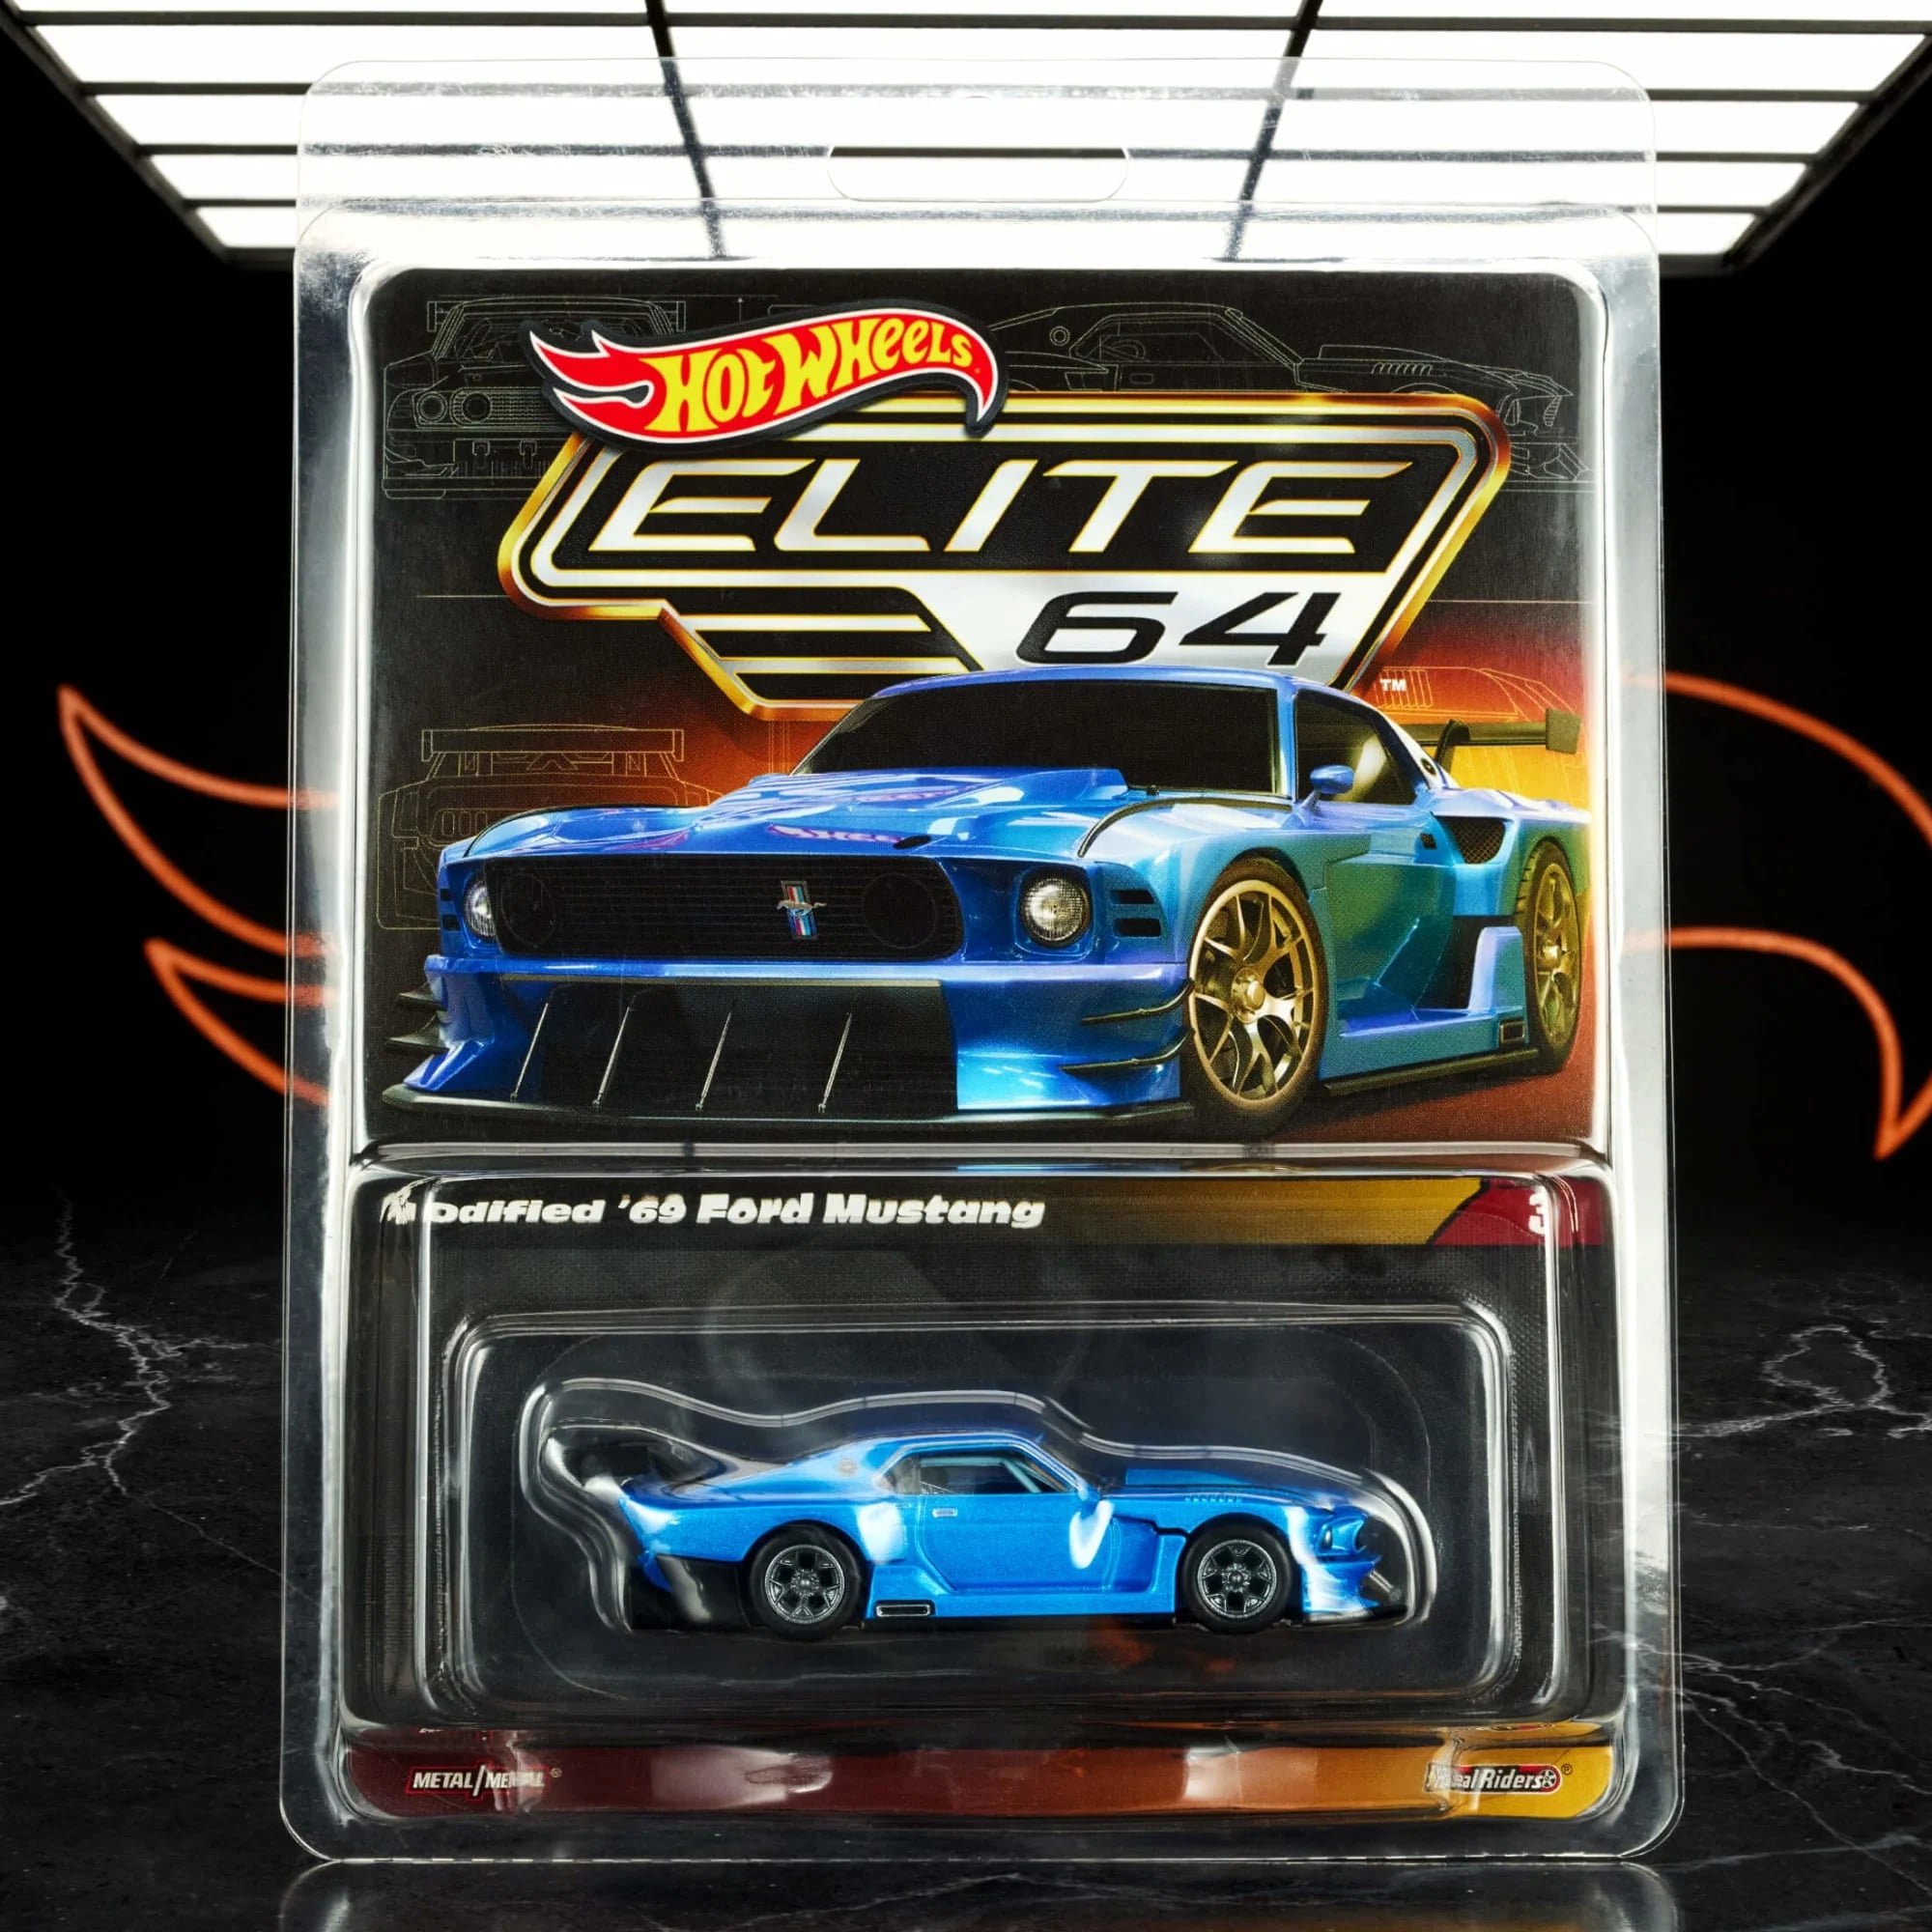 Hot Wheels Exclusive Elite 64 Series Modified ’69 Ford Mustang